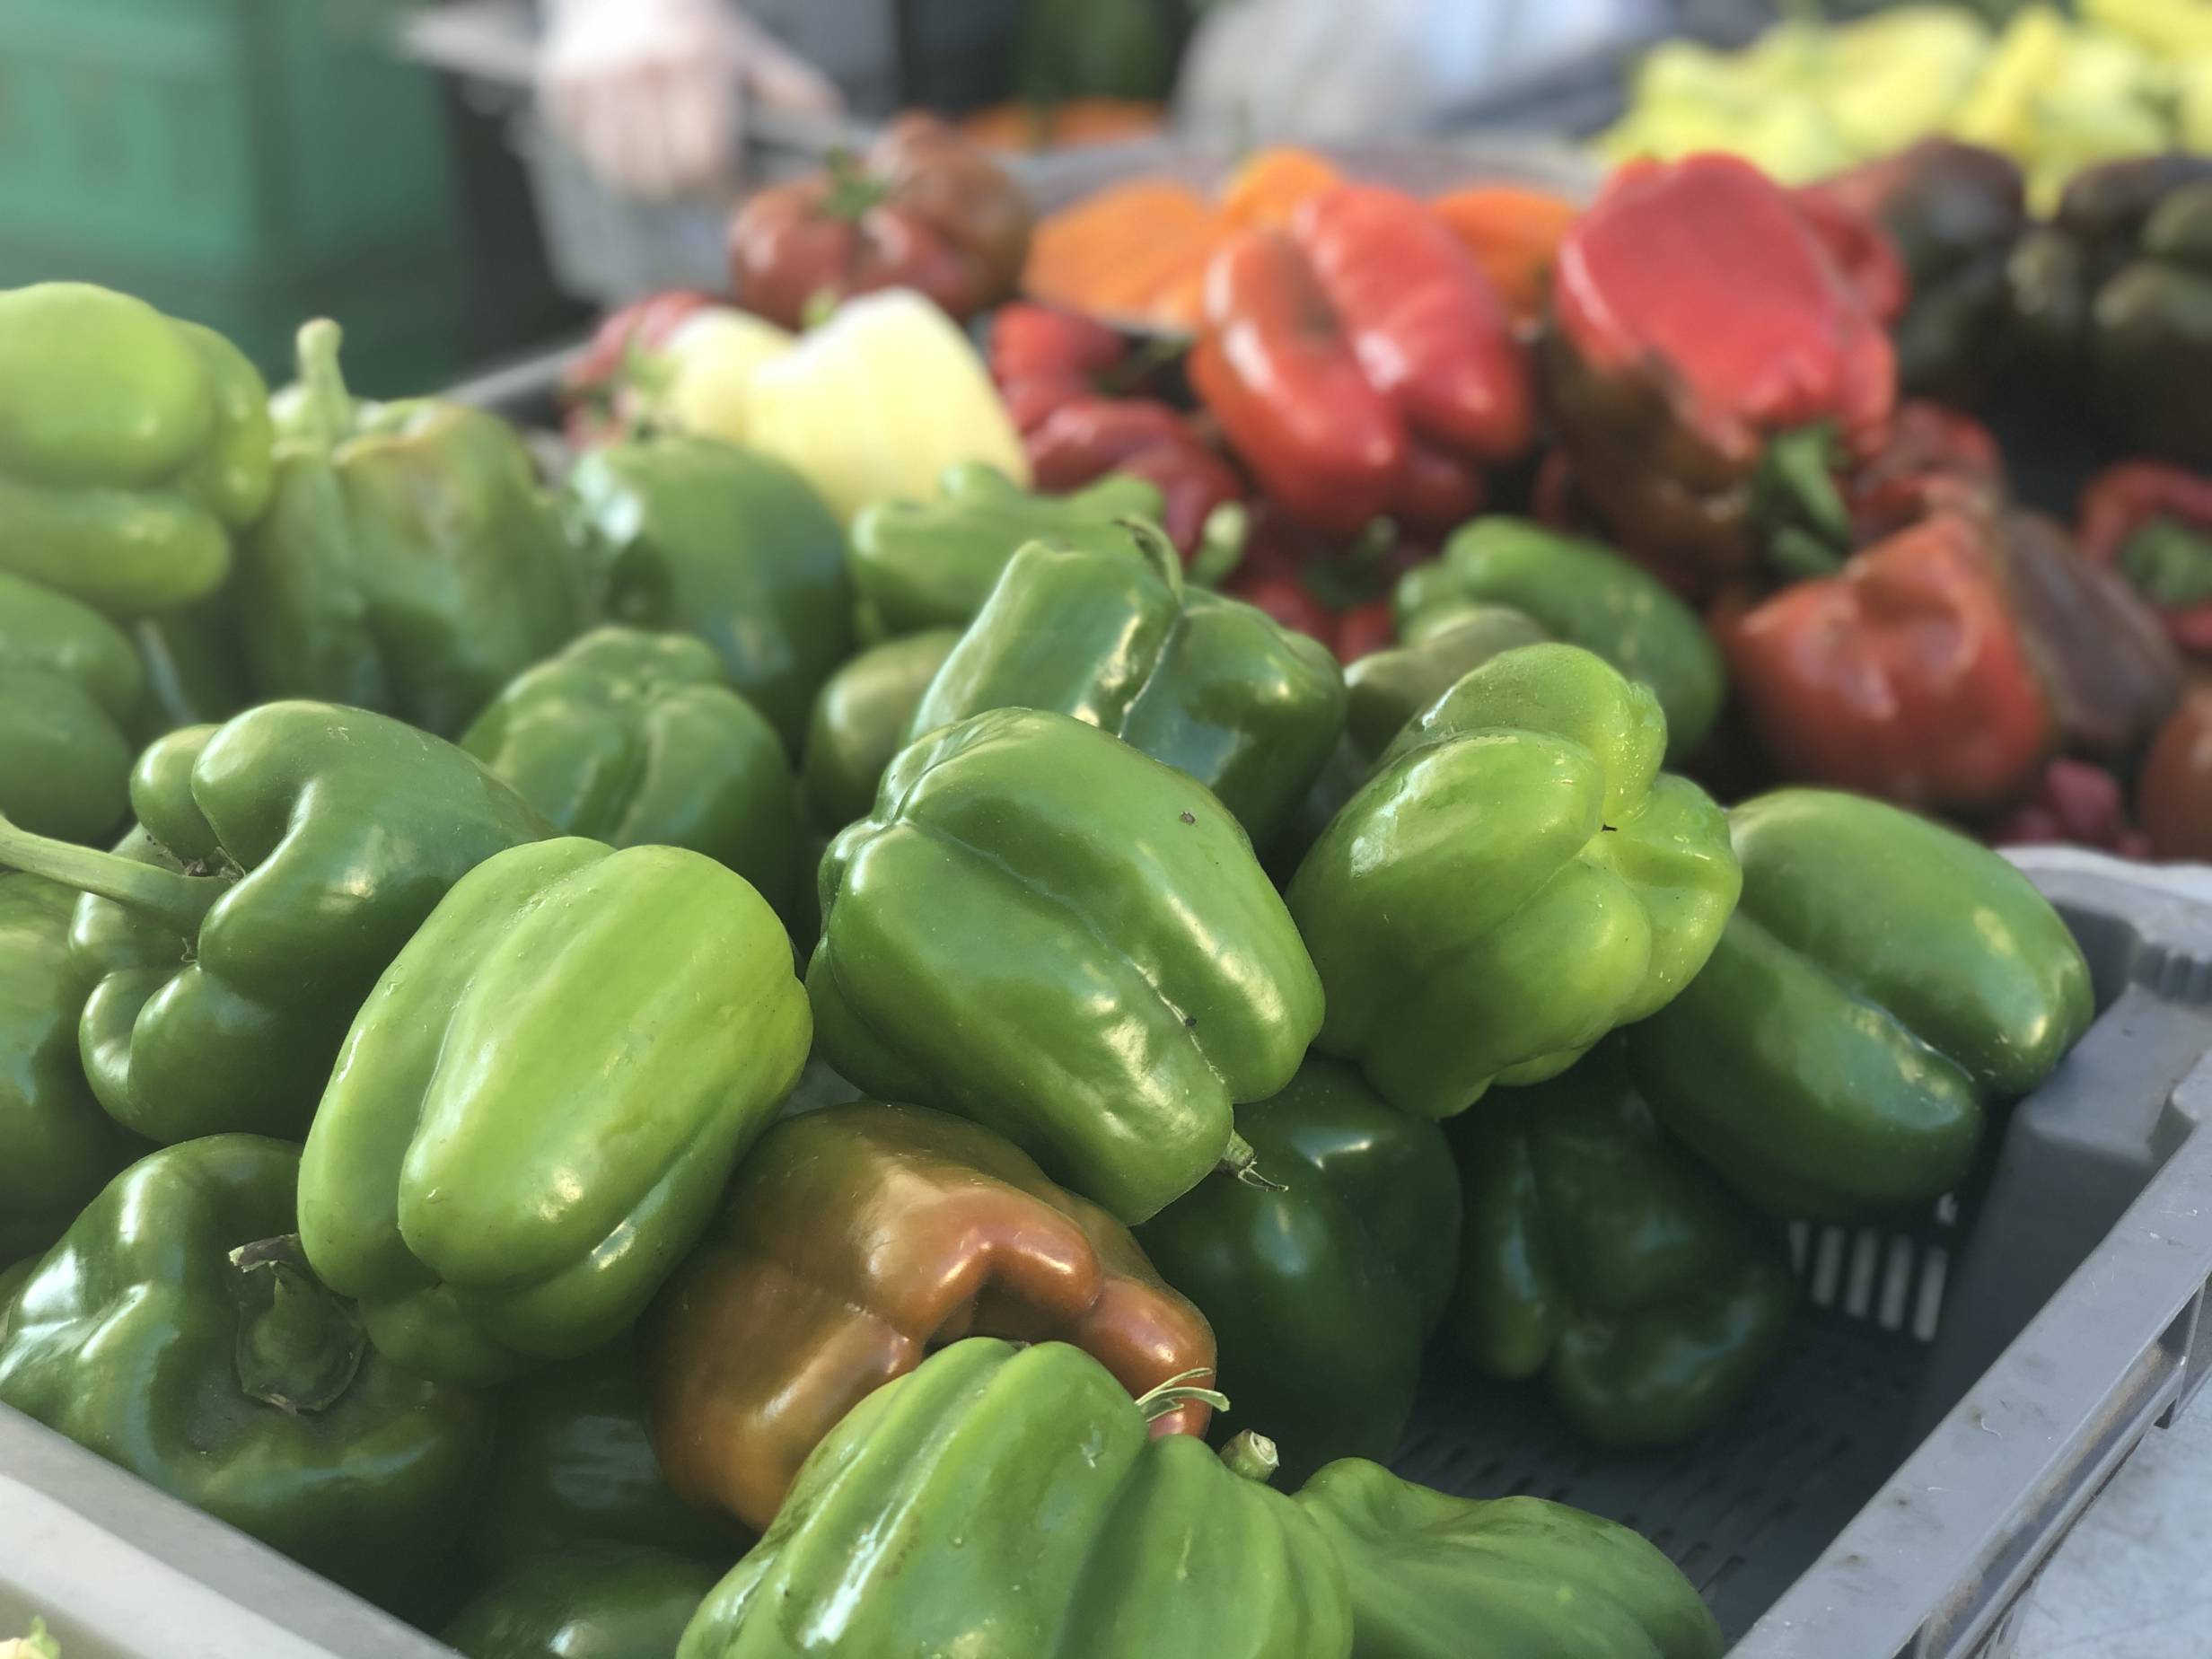 A gray plastic basket holds many green bell peppers next to another gray plastic basket holding red, purple, and yellow bell peppers from Meyer Produce at the Urbana Market in the Square. Photo by Alyssa Buckley.